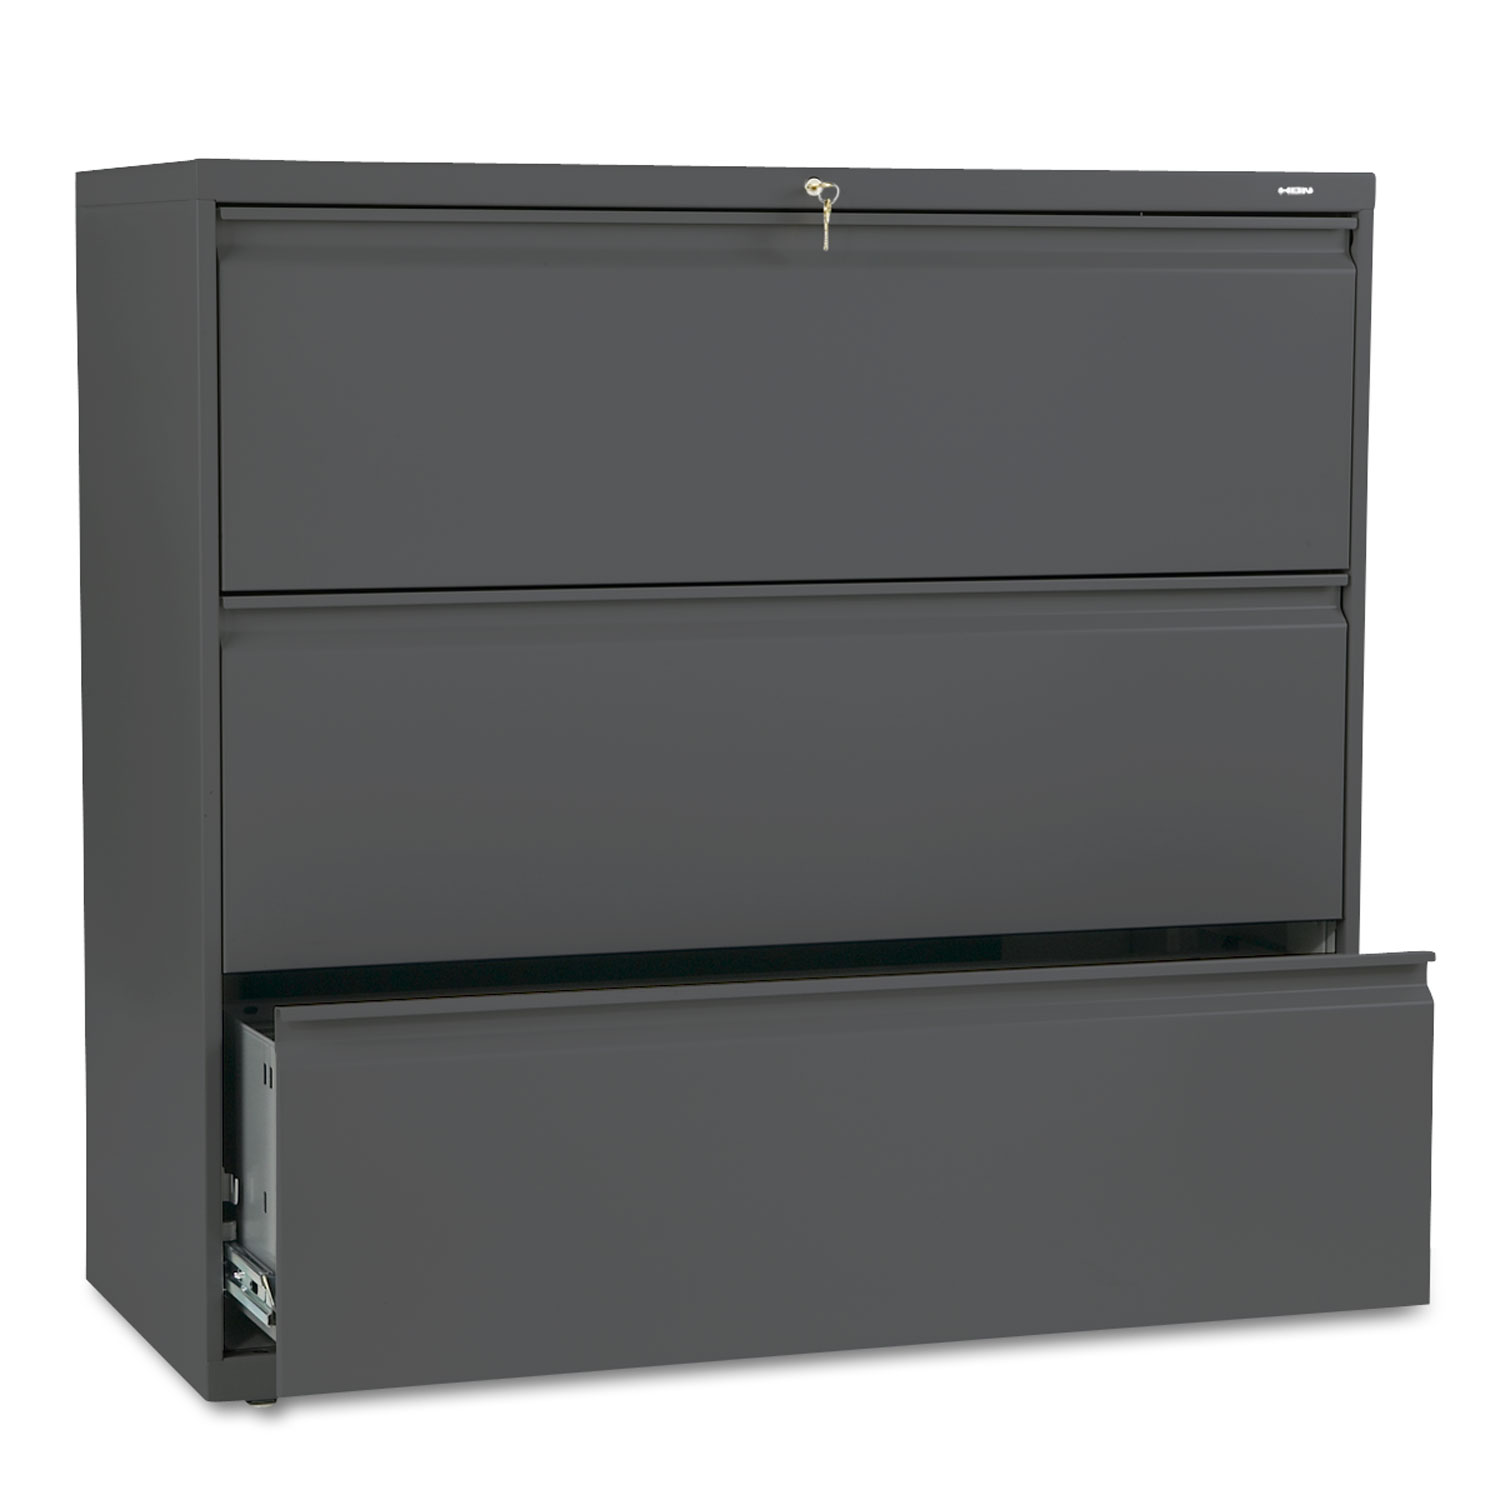 800 Series Three-Drawer Lateral File, 42w x 19-1/4d x 40-7/8h, Charcoal